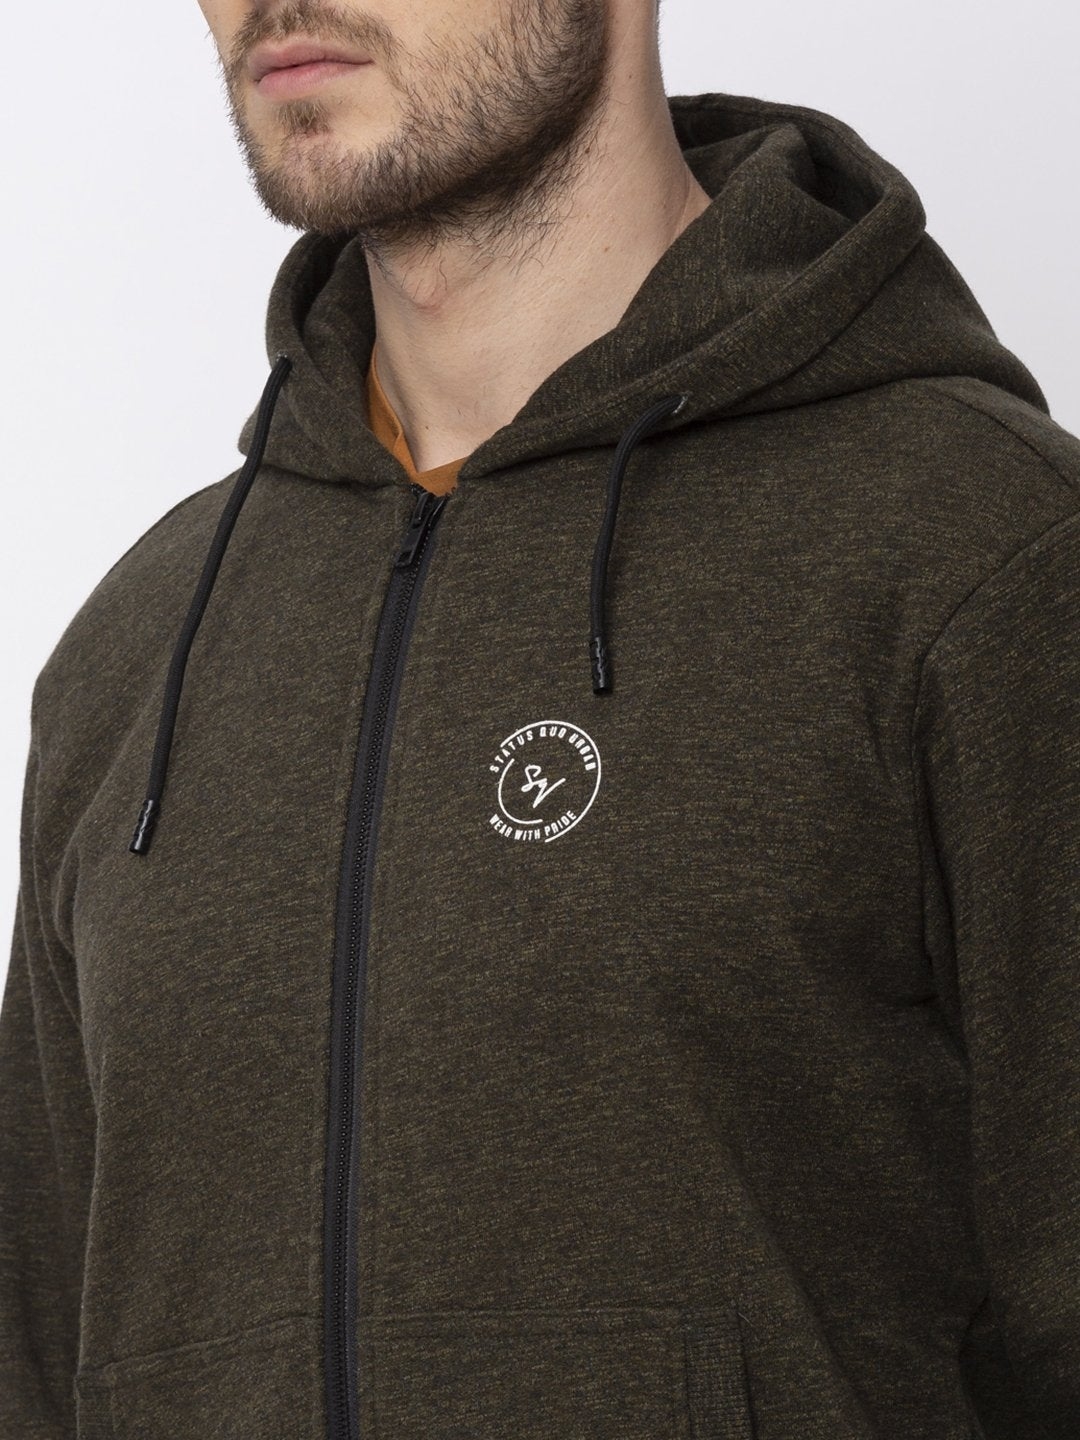 Men's Green Polycotton Solid Hoodies